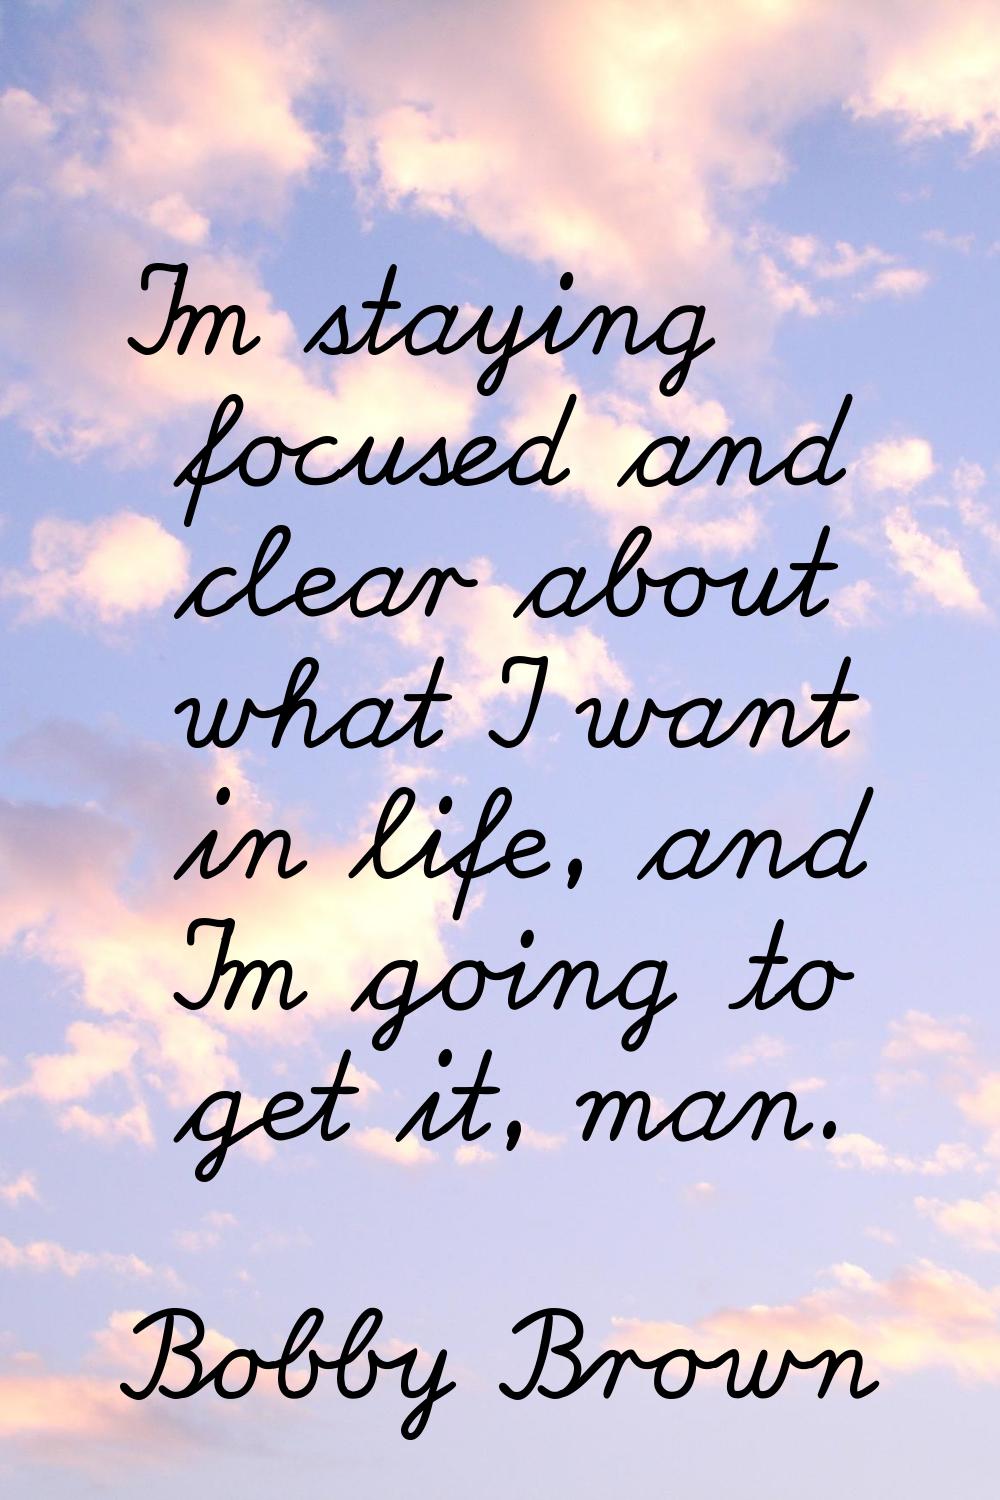 I'm staying focused and clear about what I want in life, and I'm going to get it, man.